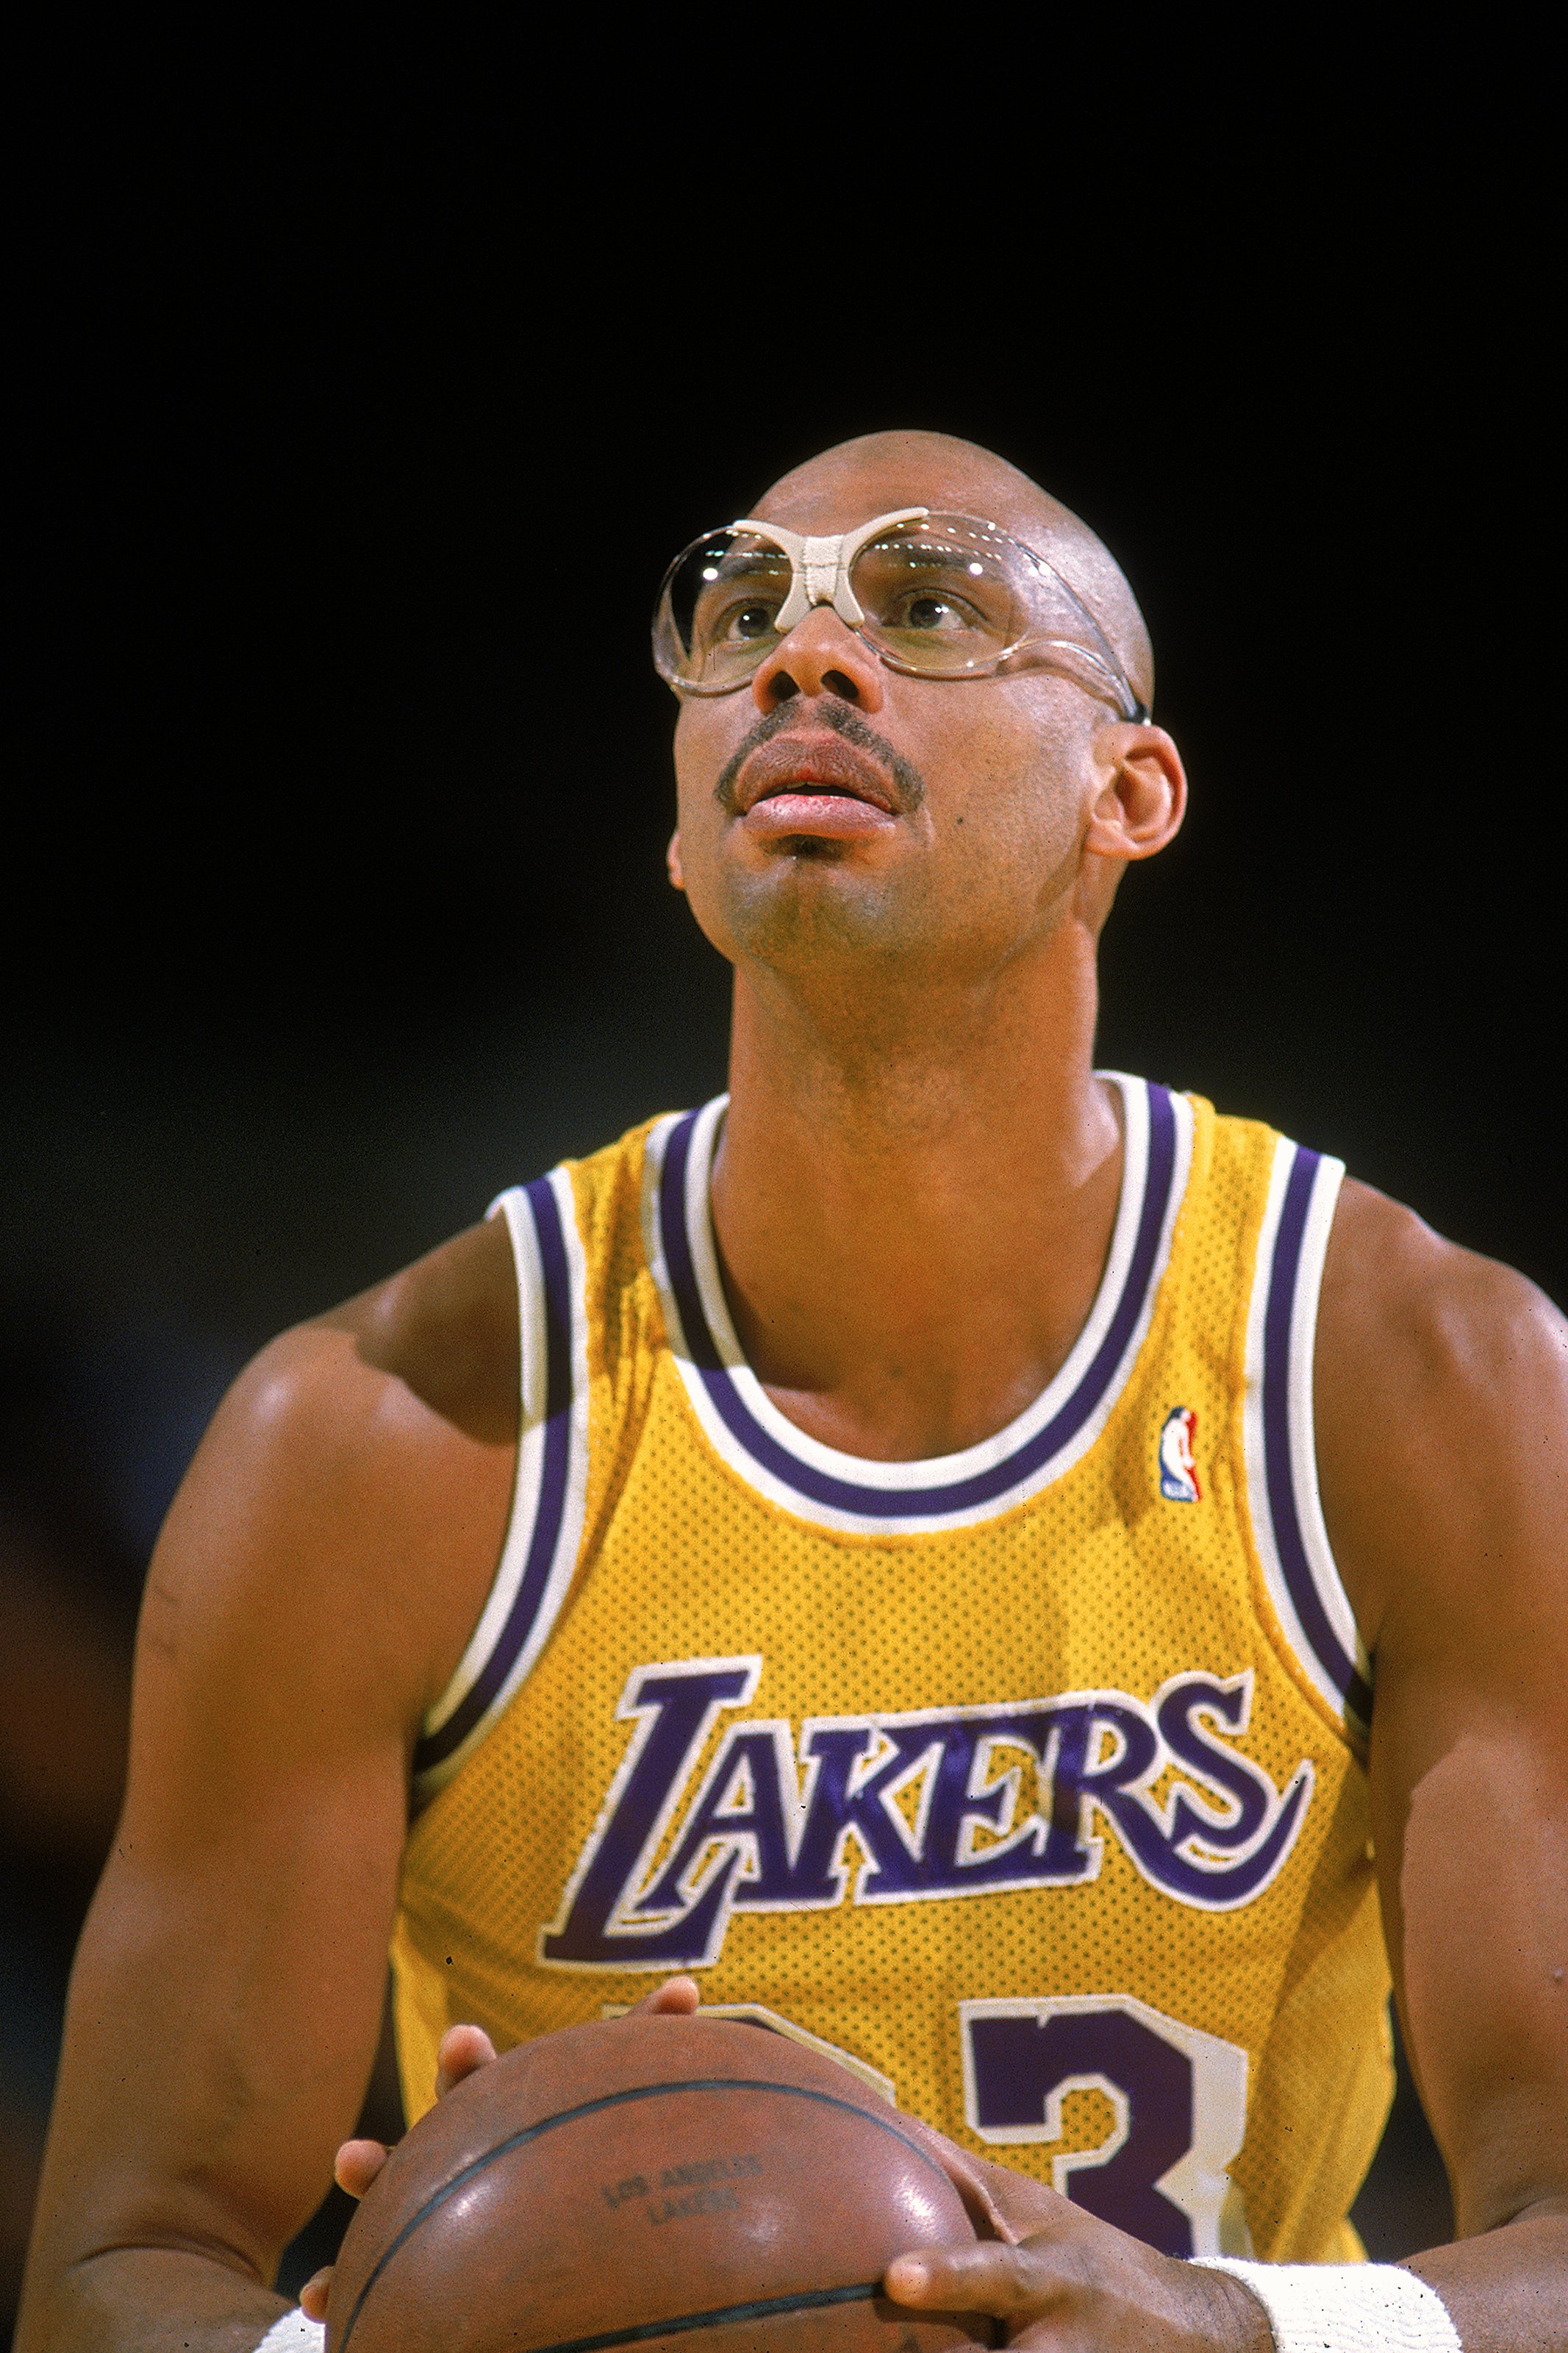 1989: Kareem Abdul- Jabbar of the Los Angeles Lakers makes a free throw during a game.  Mandatory Credit: Stephen Dunn  /Allsport